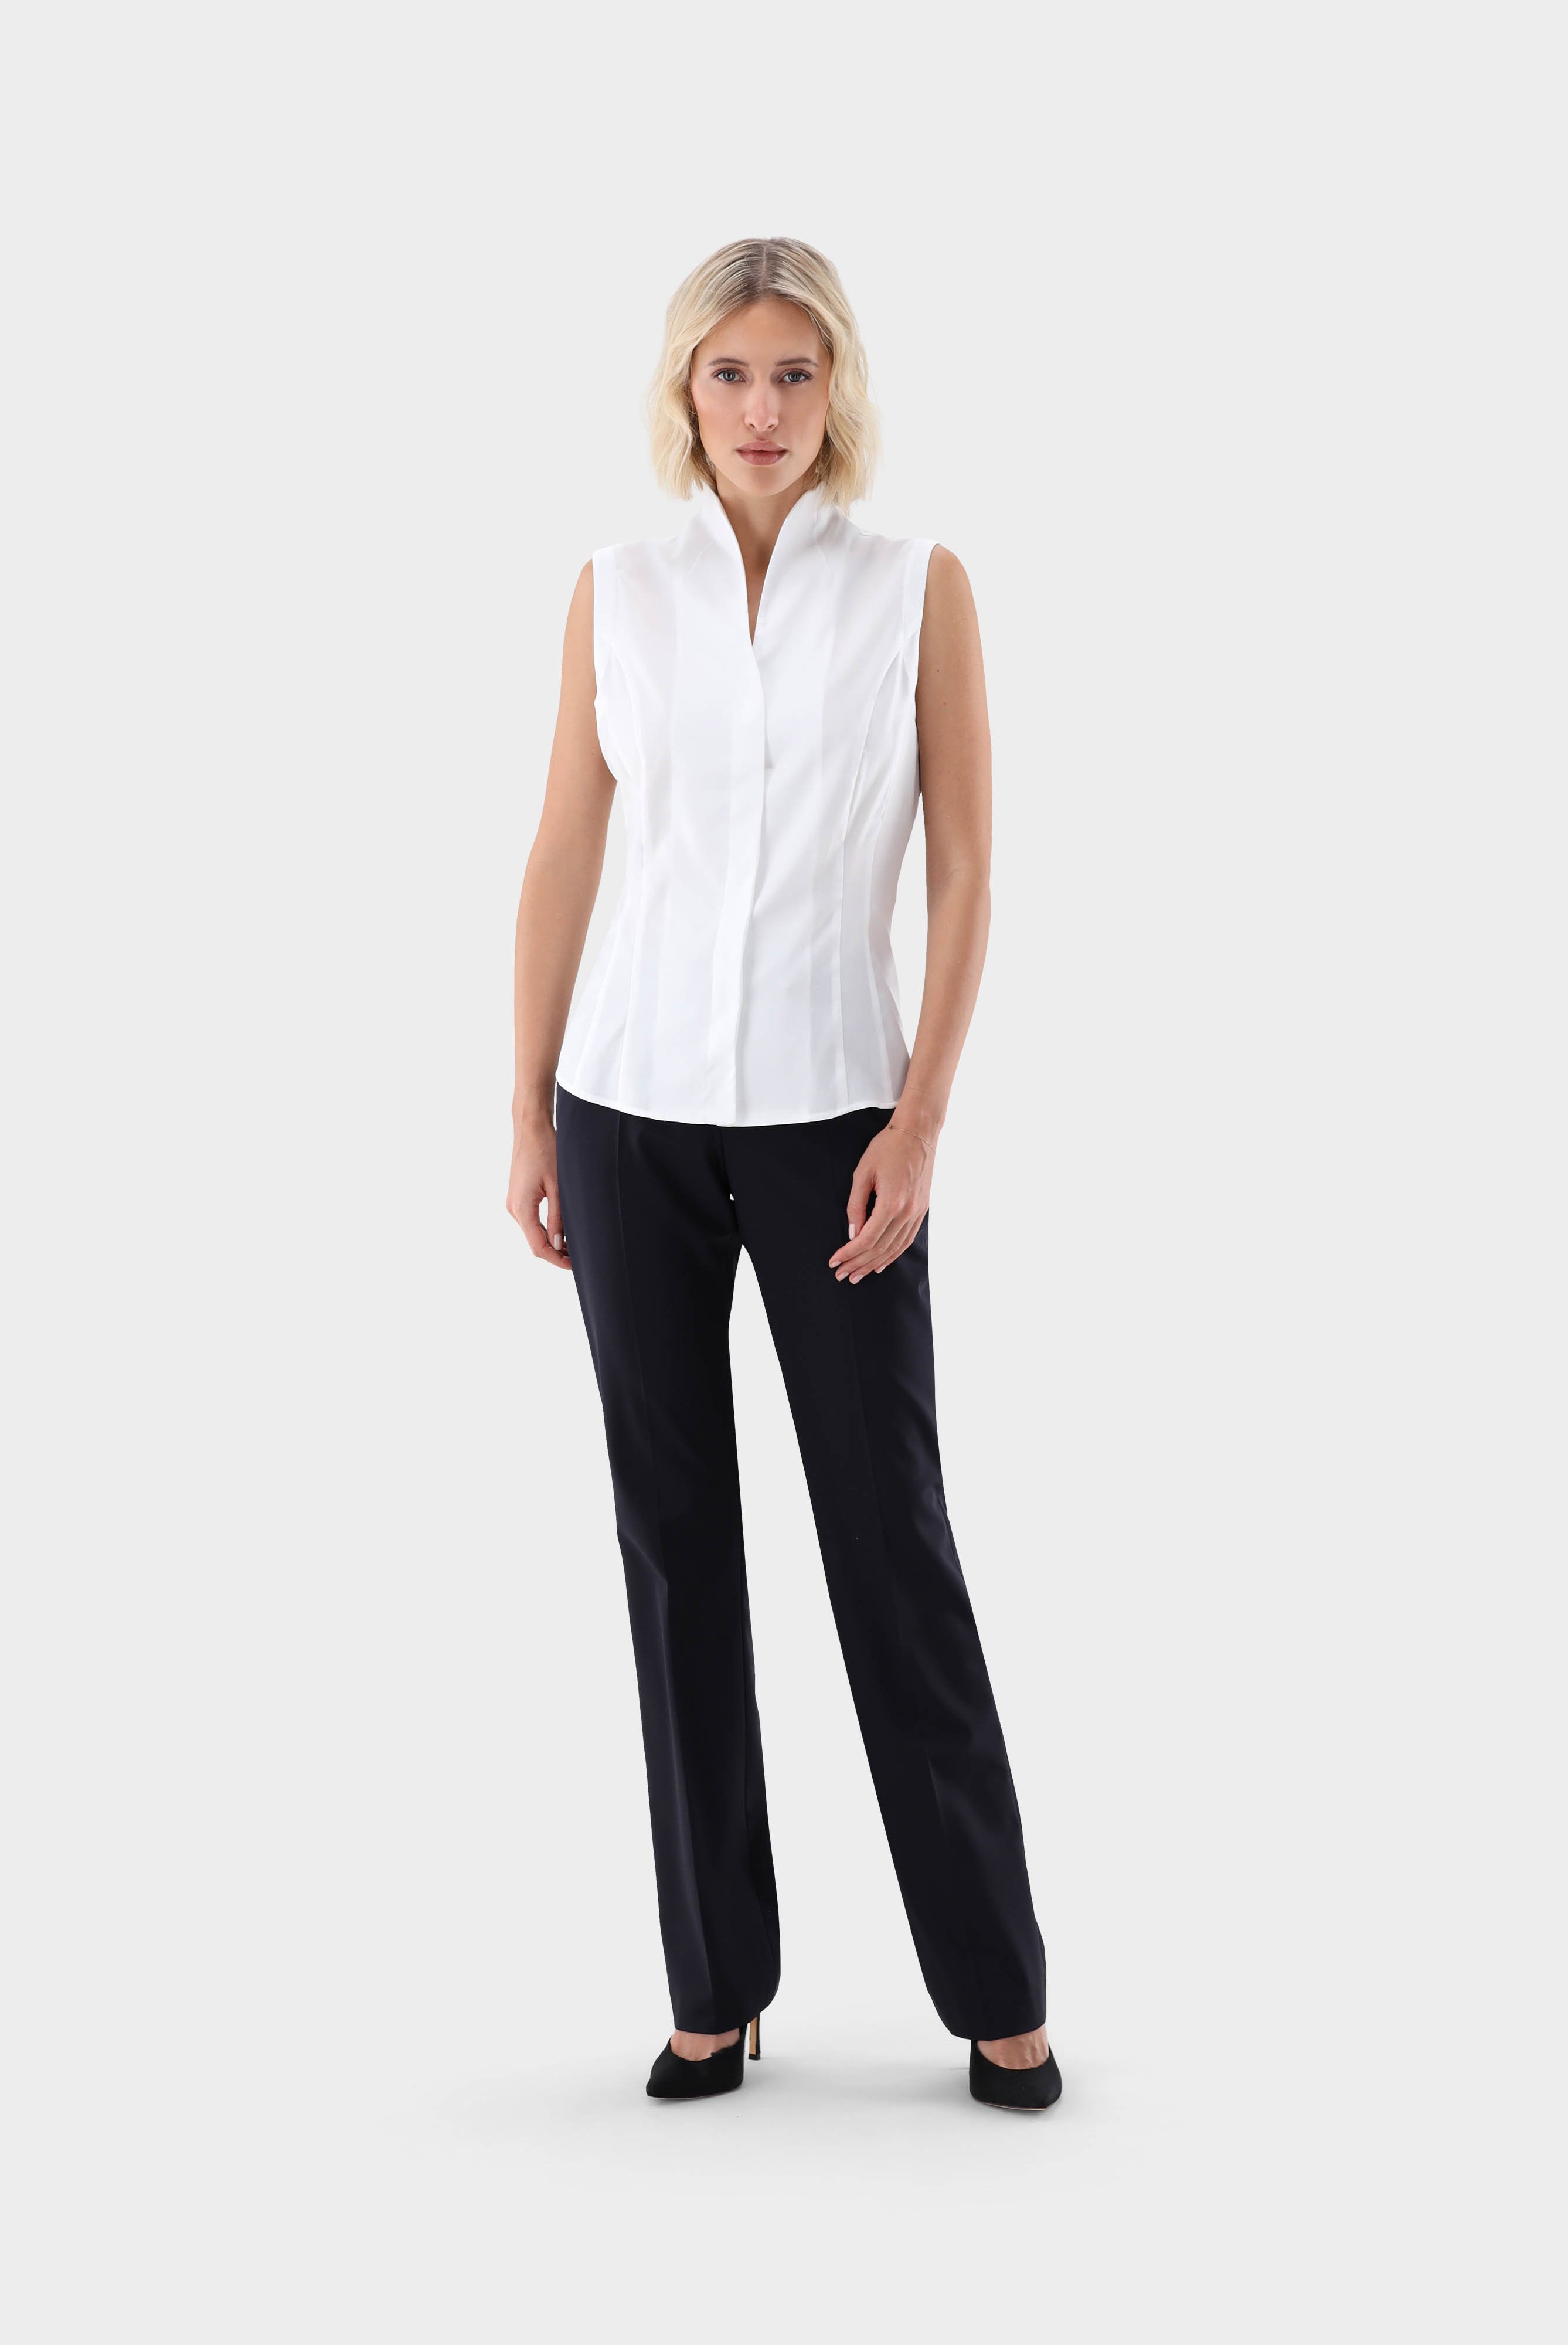 Jeans & Trousers+Classic Business Trousers in Wool Stretch+04.6083..H00528.790.34